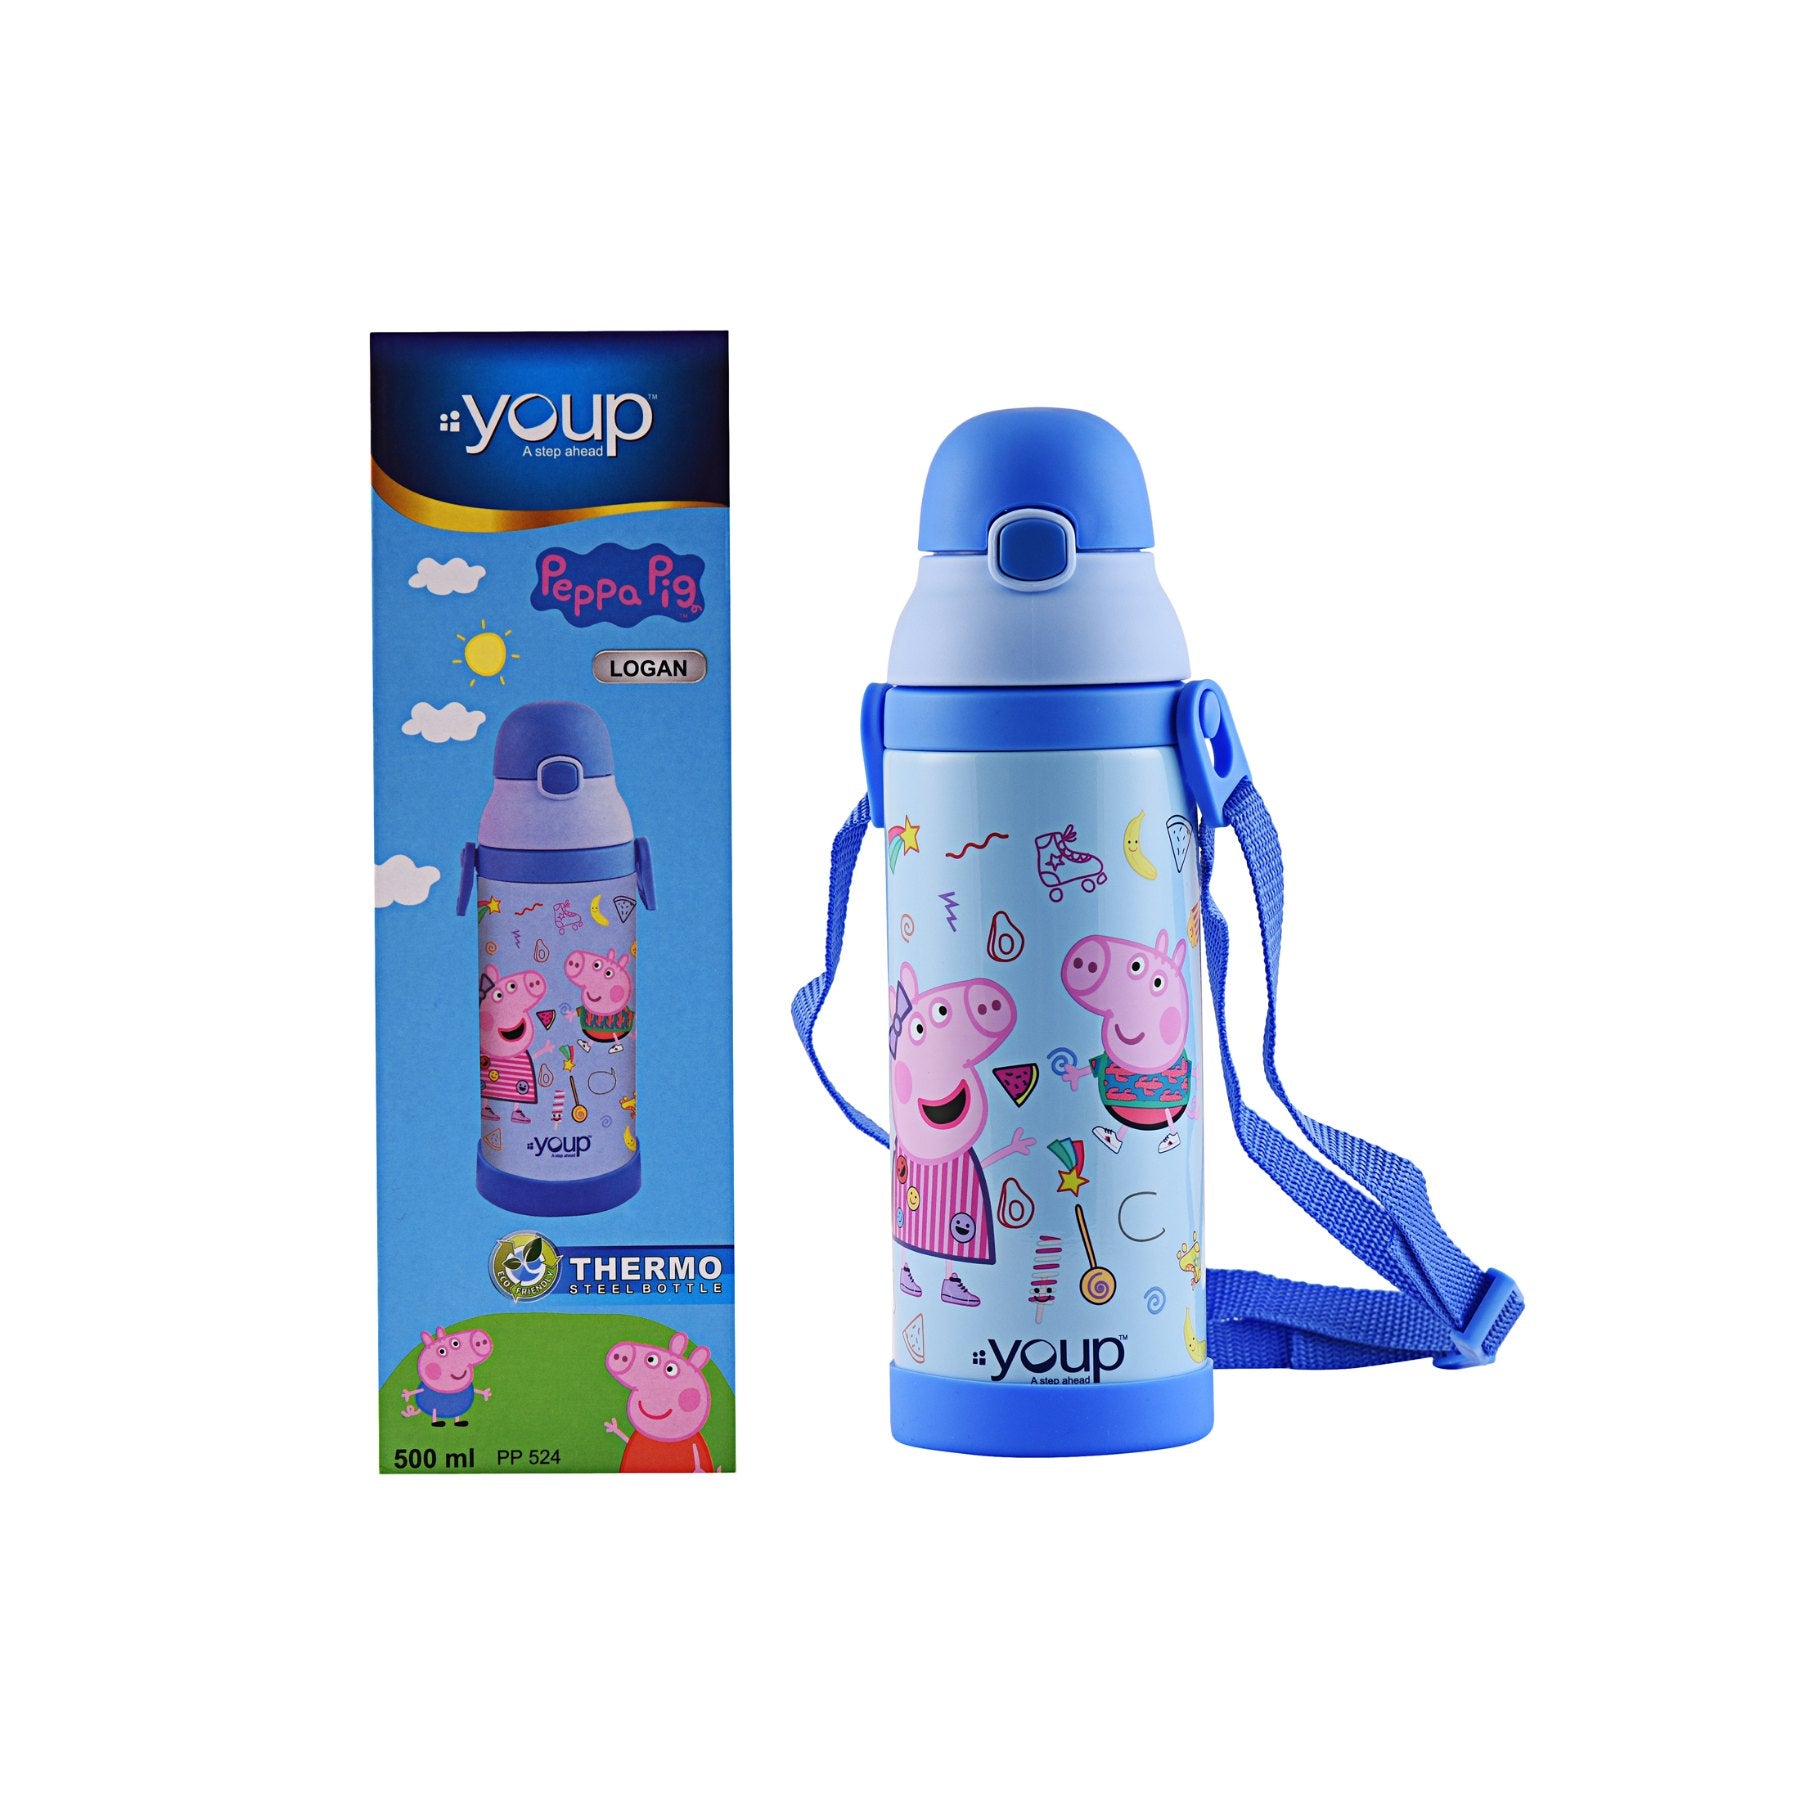 Youp Stainless Steel Insulated Blue Color Peppa Pig Kids Sipper Bottle Logan - 500 Ml